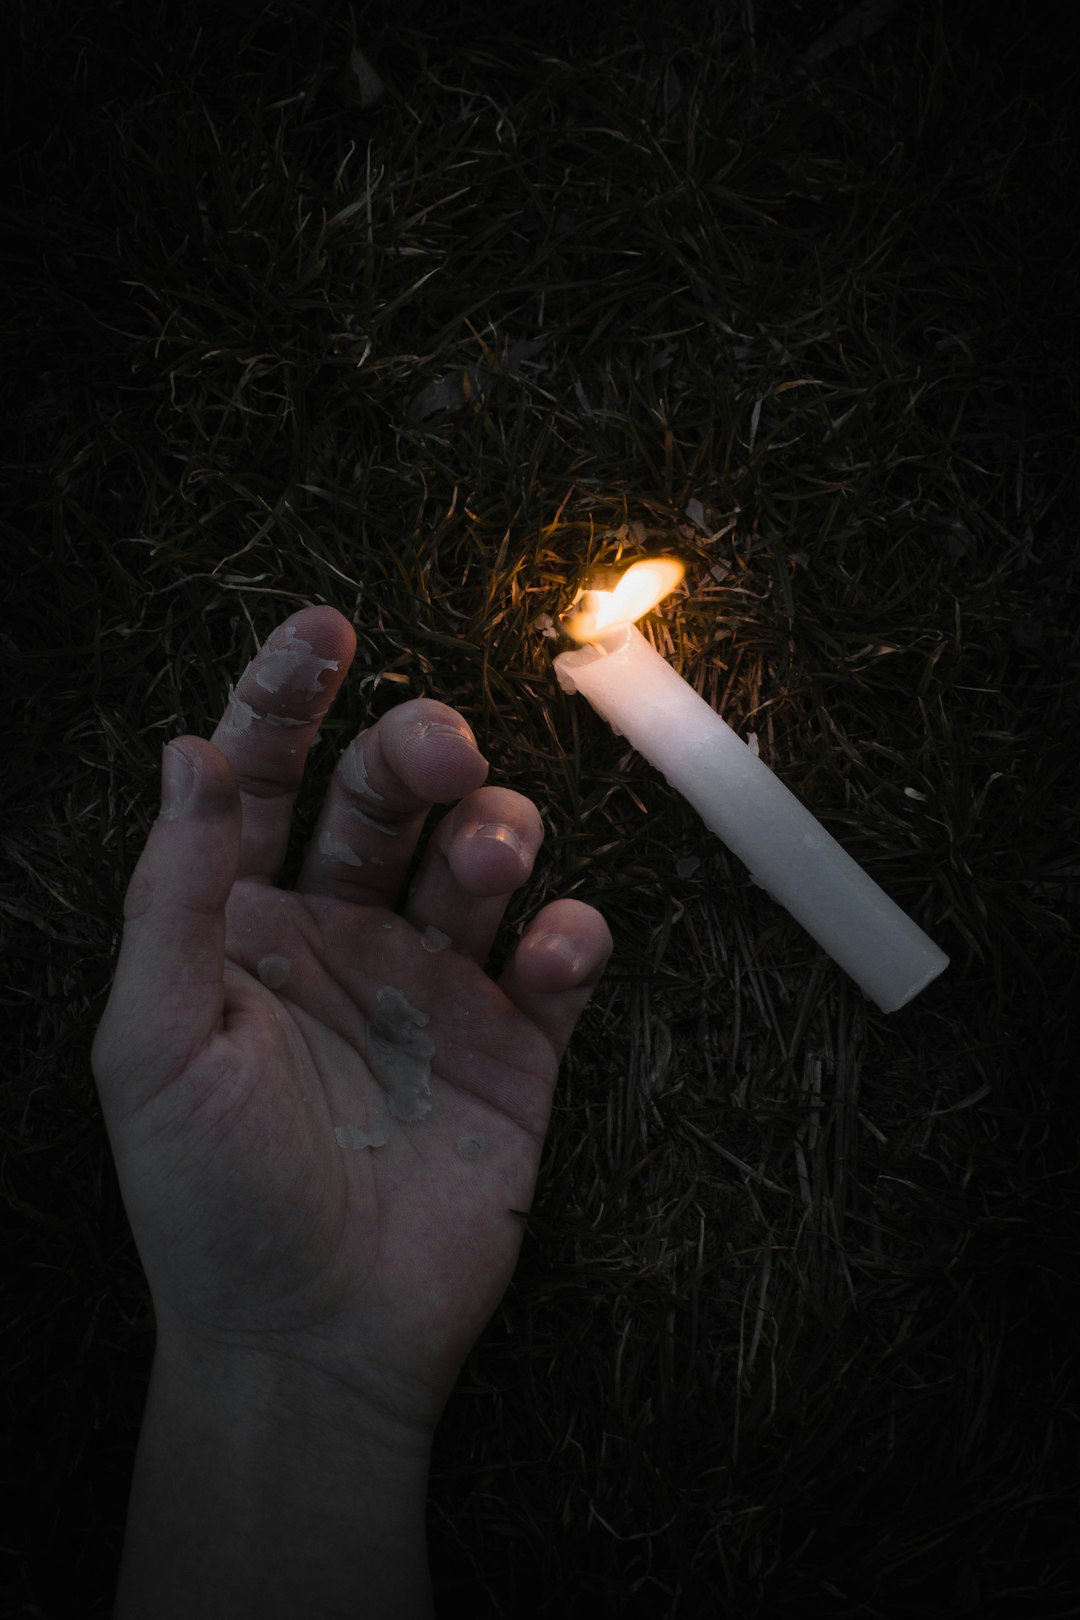 person holding lighted fire during nighttime